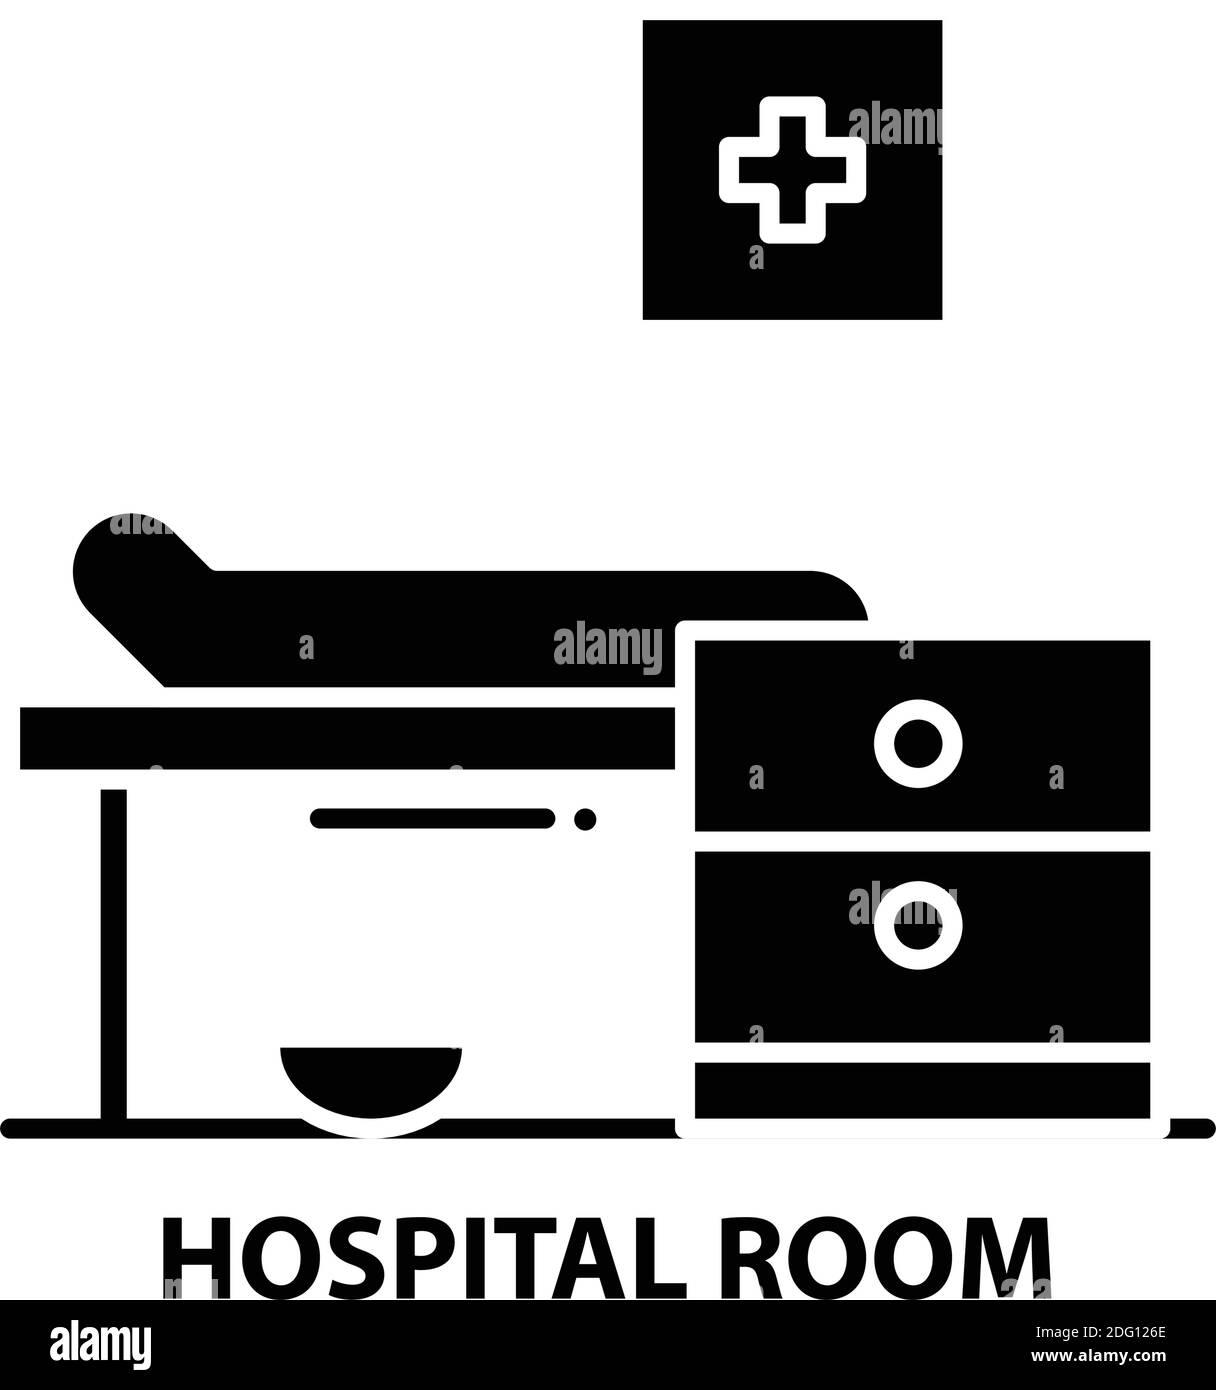 hospital room icon, black vector sign with editable strokes, concept illustration Stock Vector